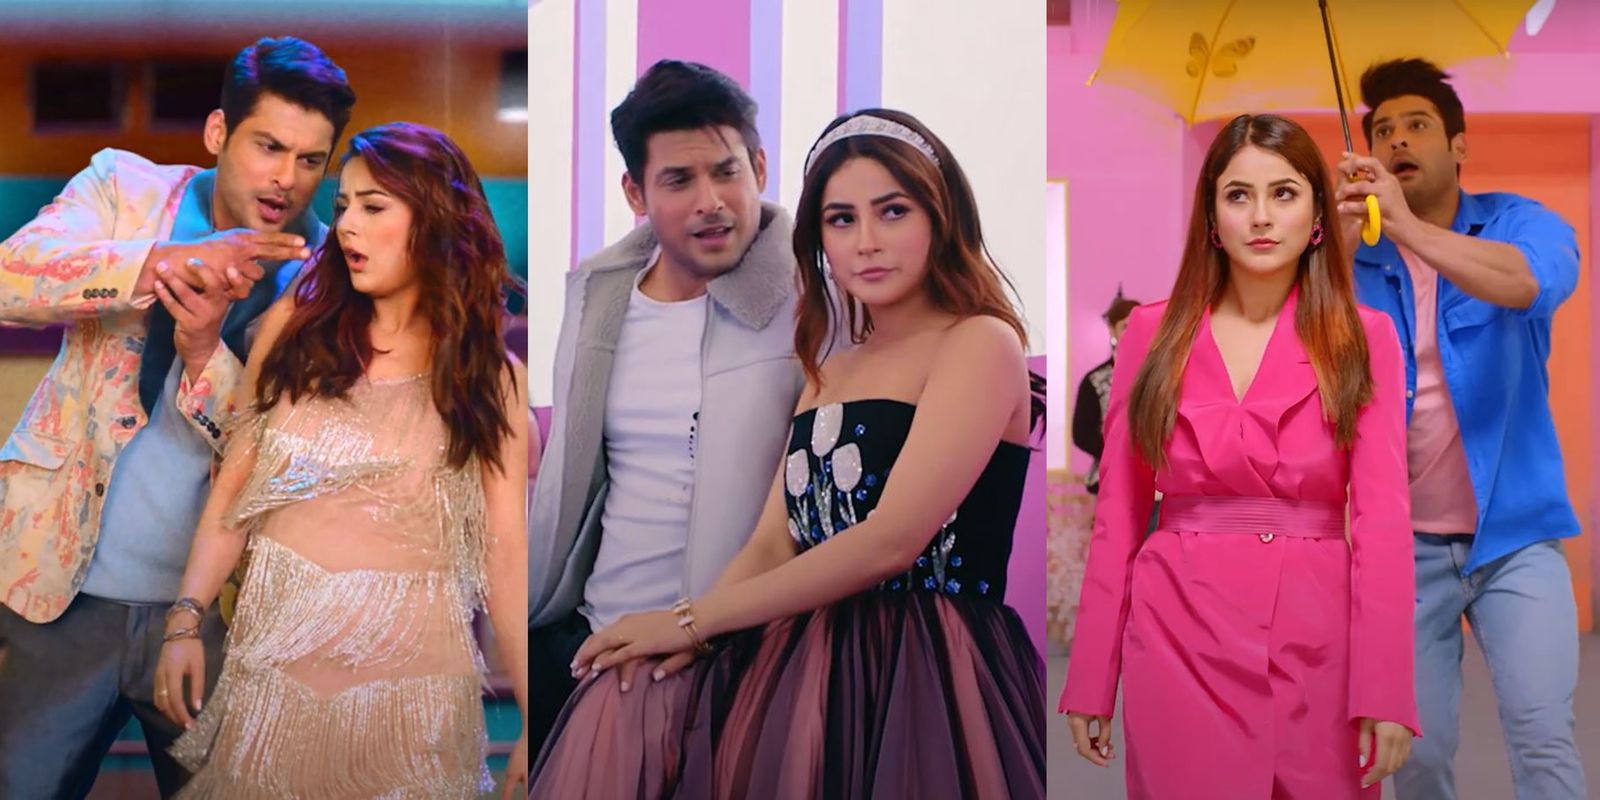 Shona Shona Song: Sidharth Shukla-Shehnaaz Gill's Chemistry Is The Highlight Of This Flashy Song With Questionable Lyrics